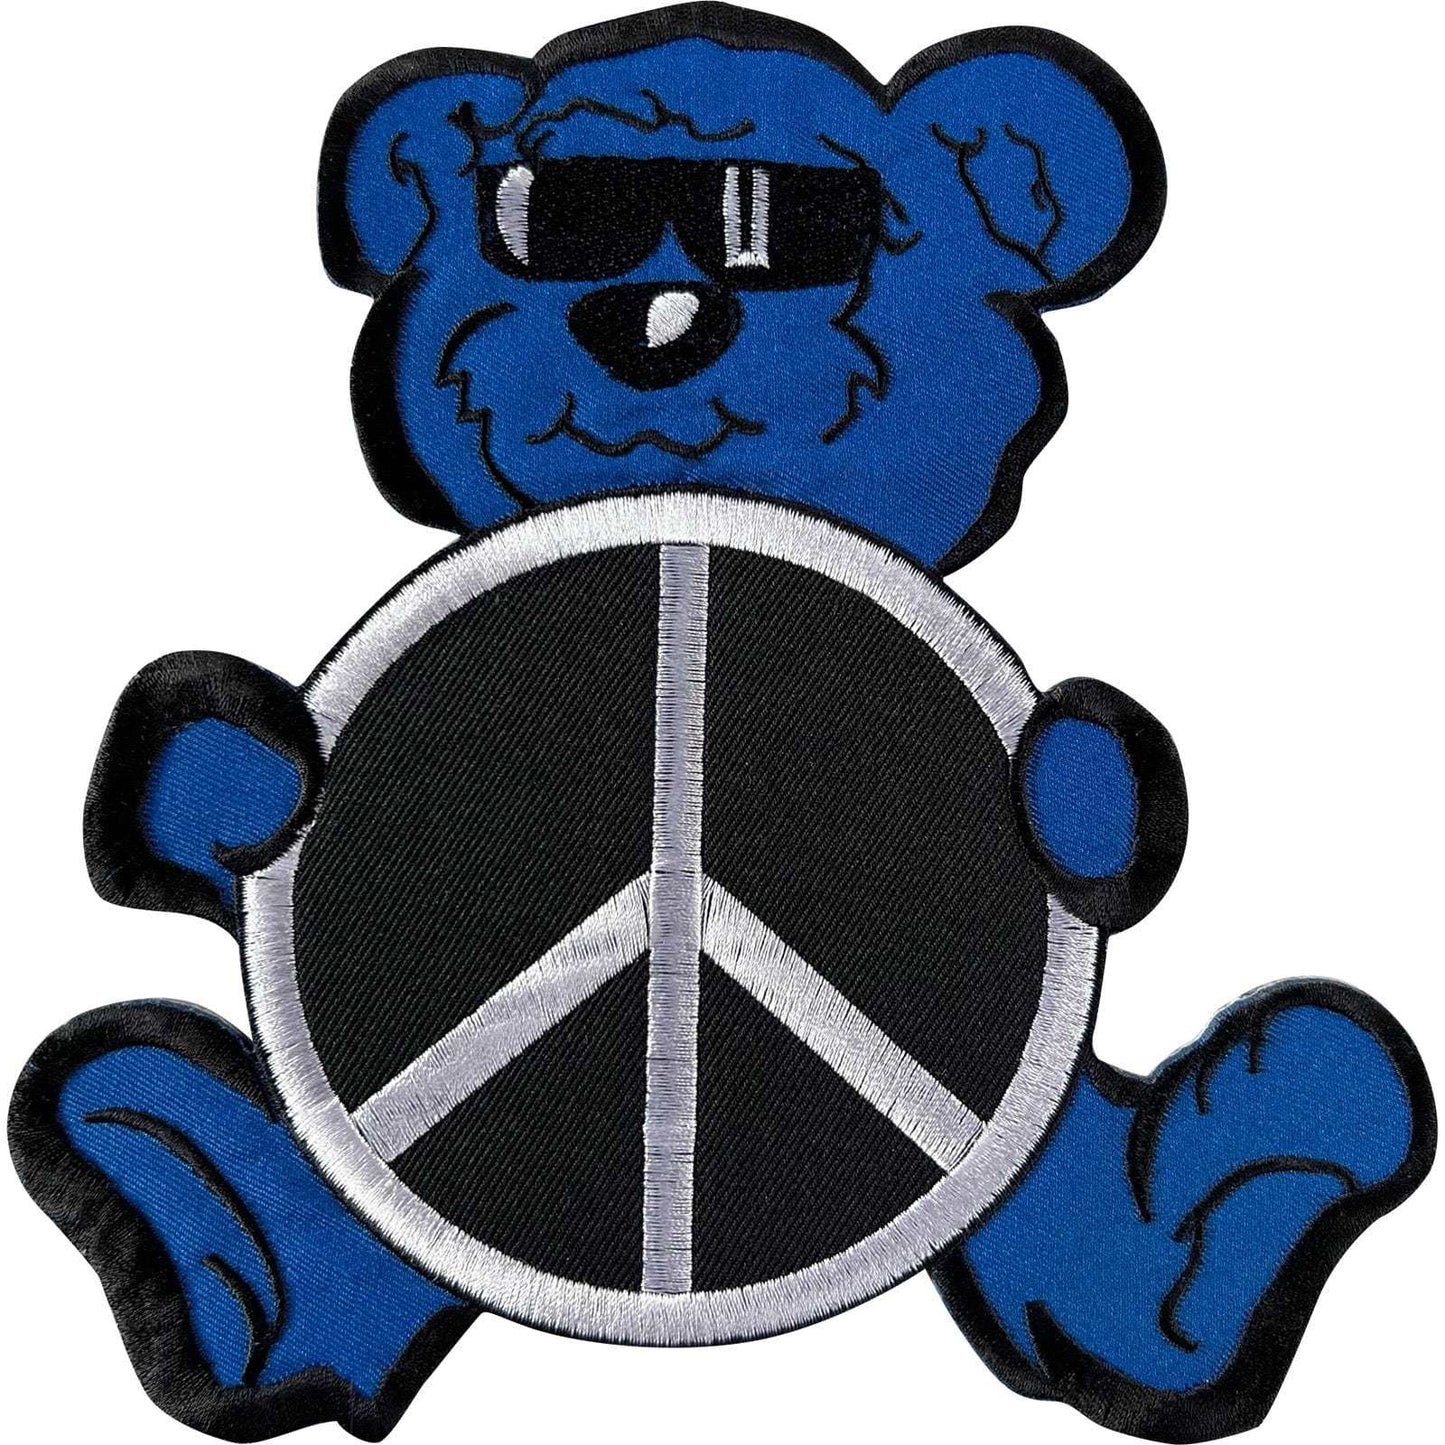 Big Large Blue Teddy Bear Peace Sign Patch Iron Sew On Clothes Embroidered Badge